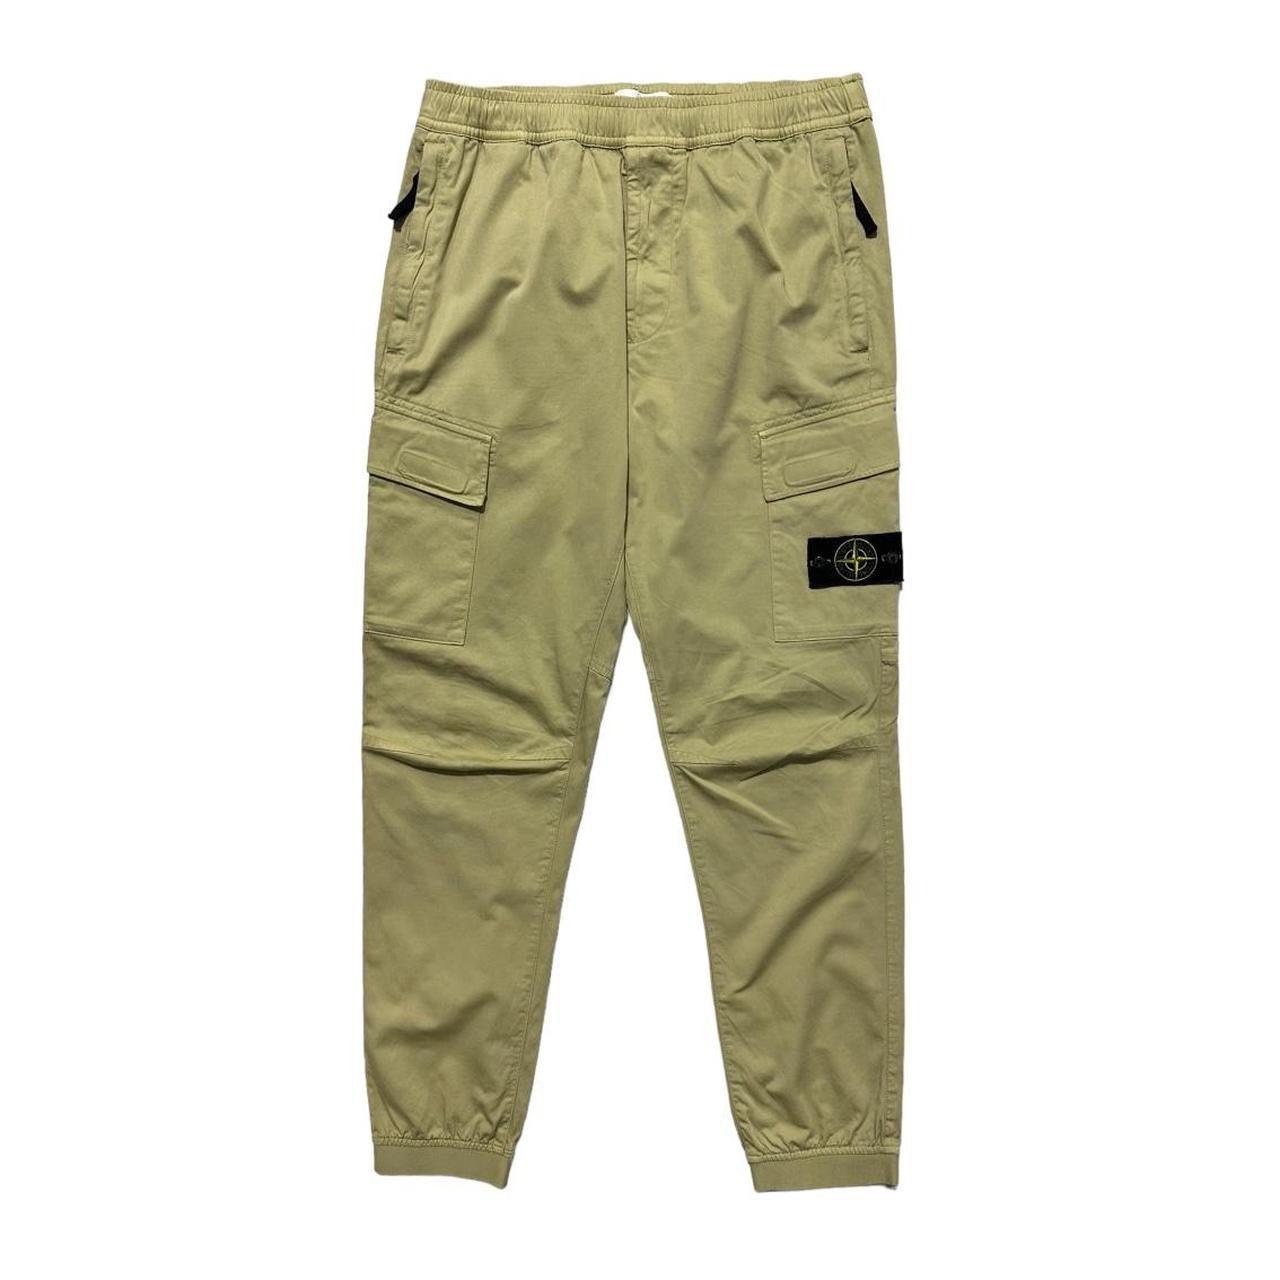 Stone Island Tan Combat Cargos Trousers - Known Source